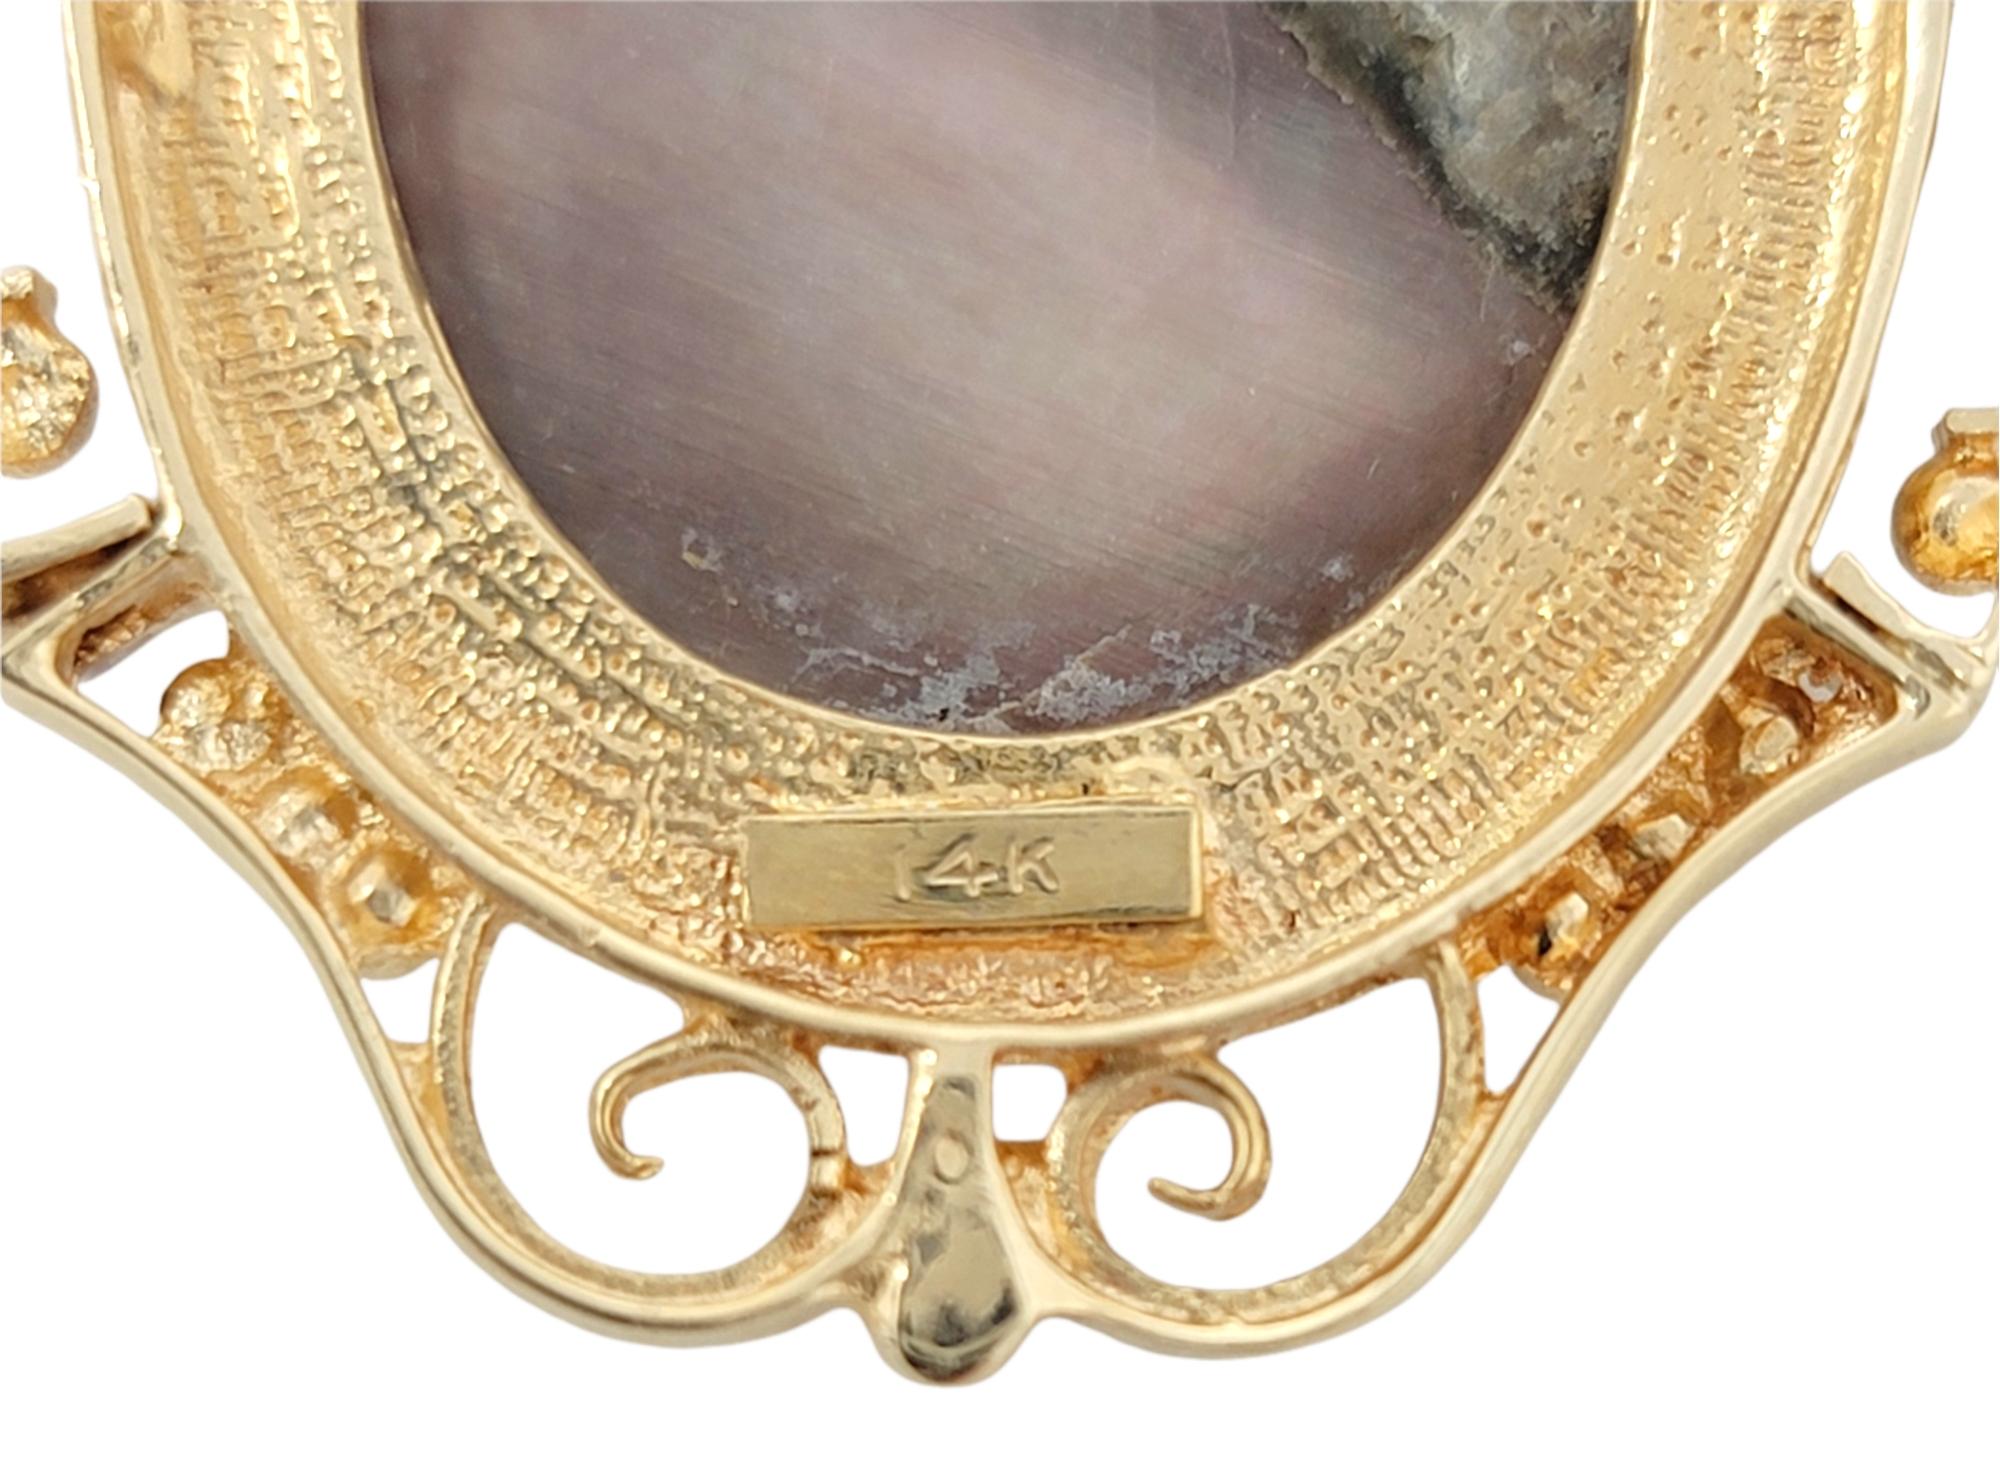 Antique Mother of Pearl Carved Cameo Brooch / Pendant in 14 Karat Yellow Gold 1